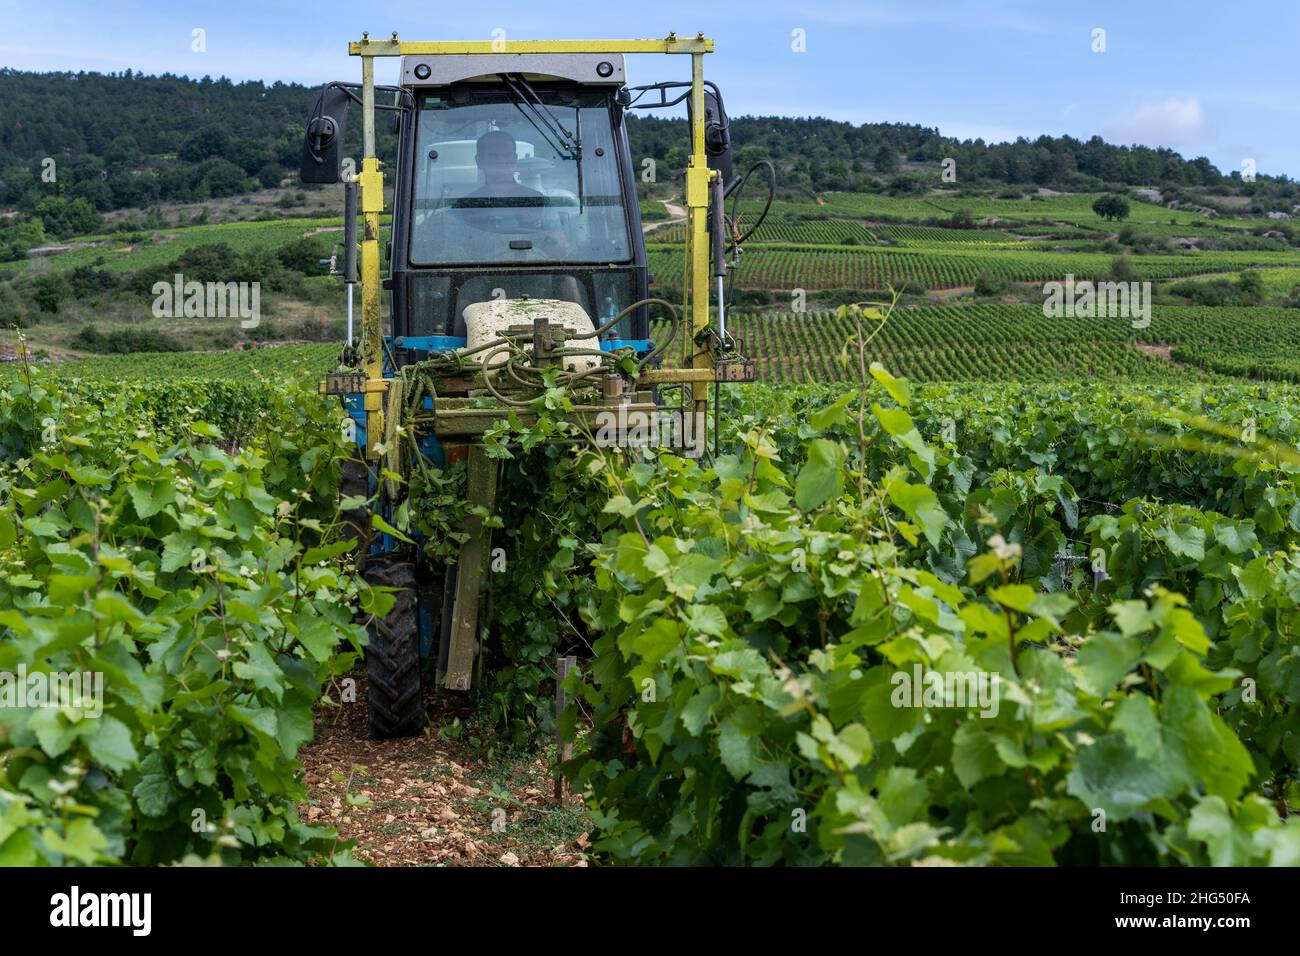 Santenay, France - July 2, 2020: Machine, tractor, used on the vineyards in Santenay, burgundy, France. Stock Photo